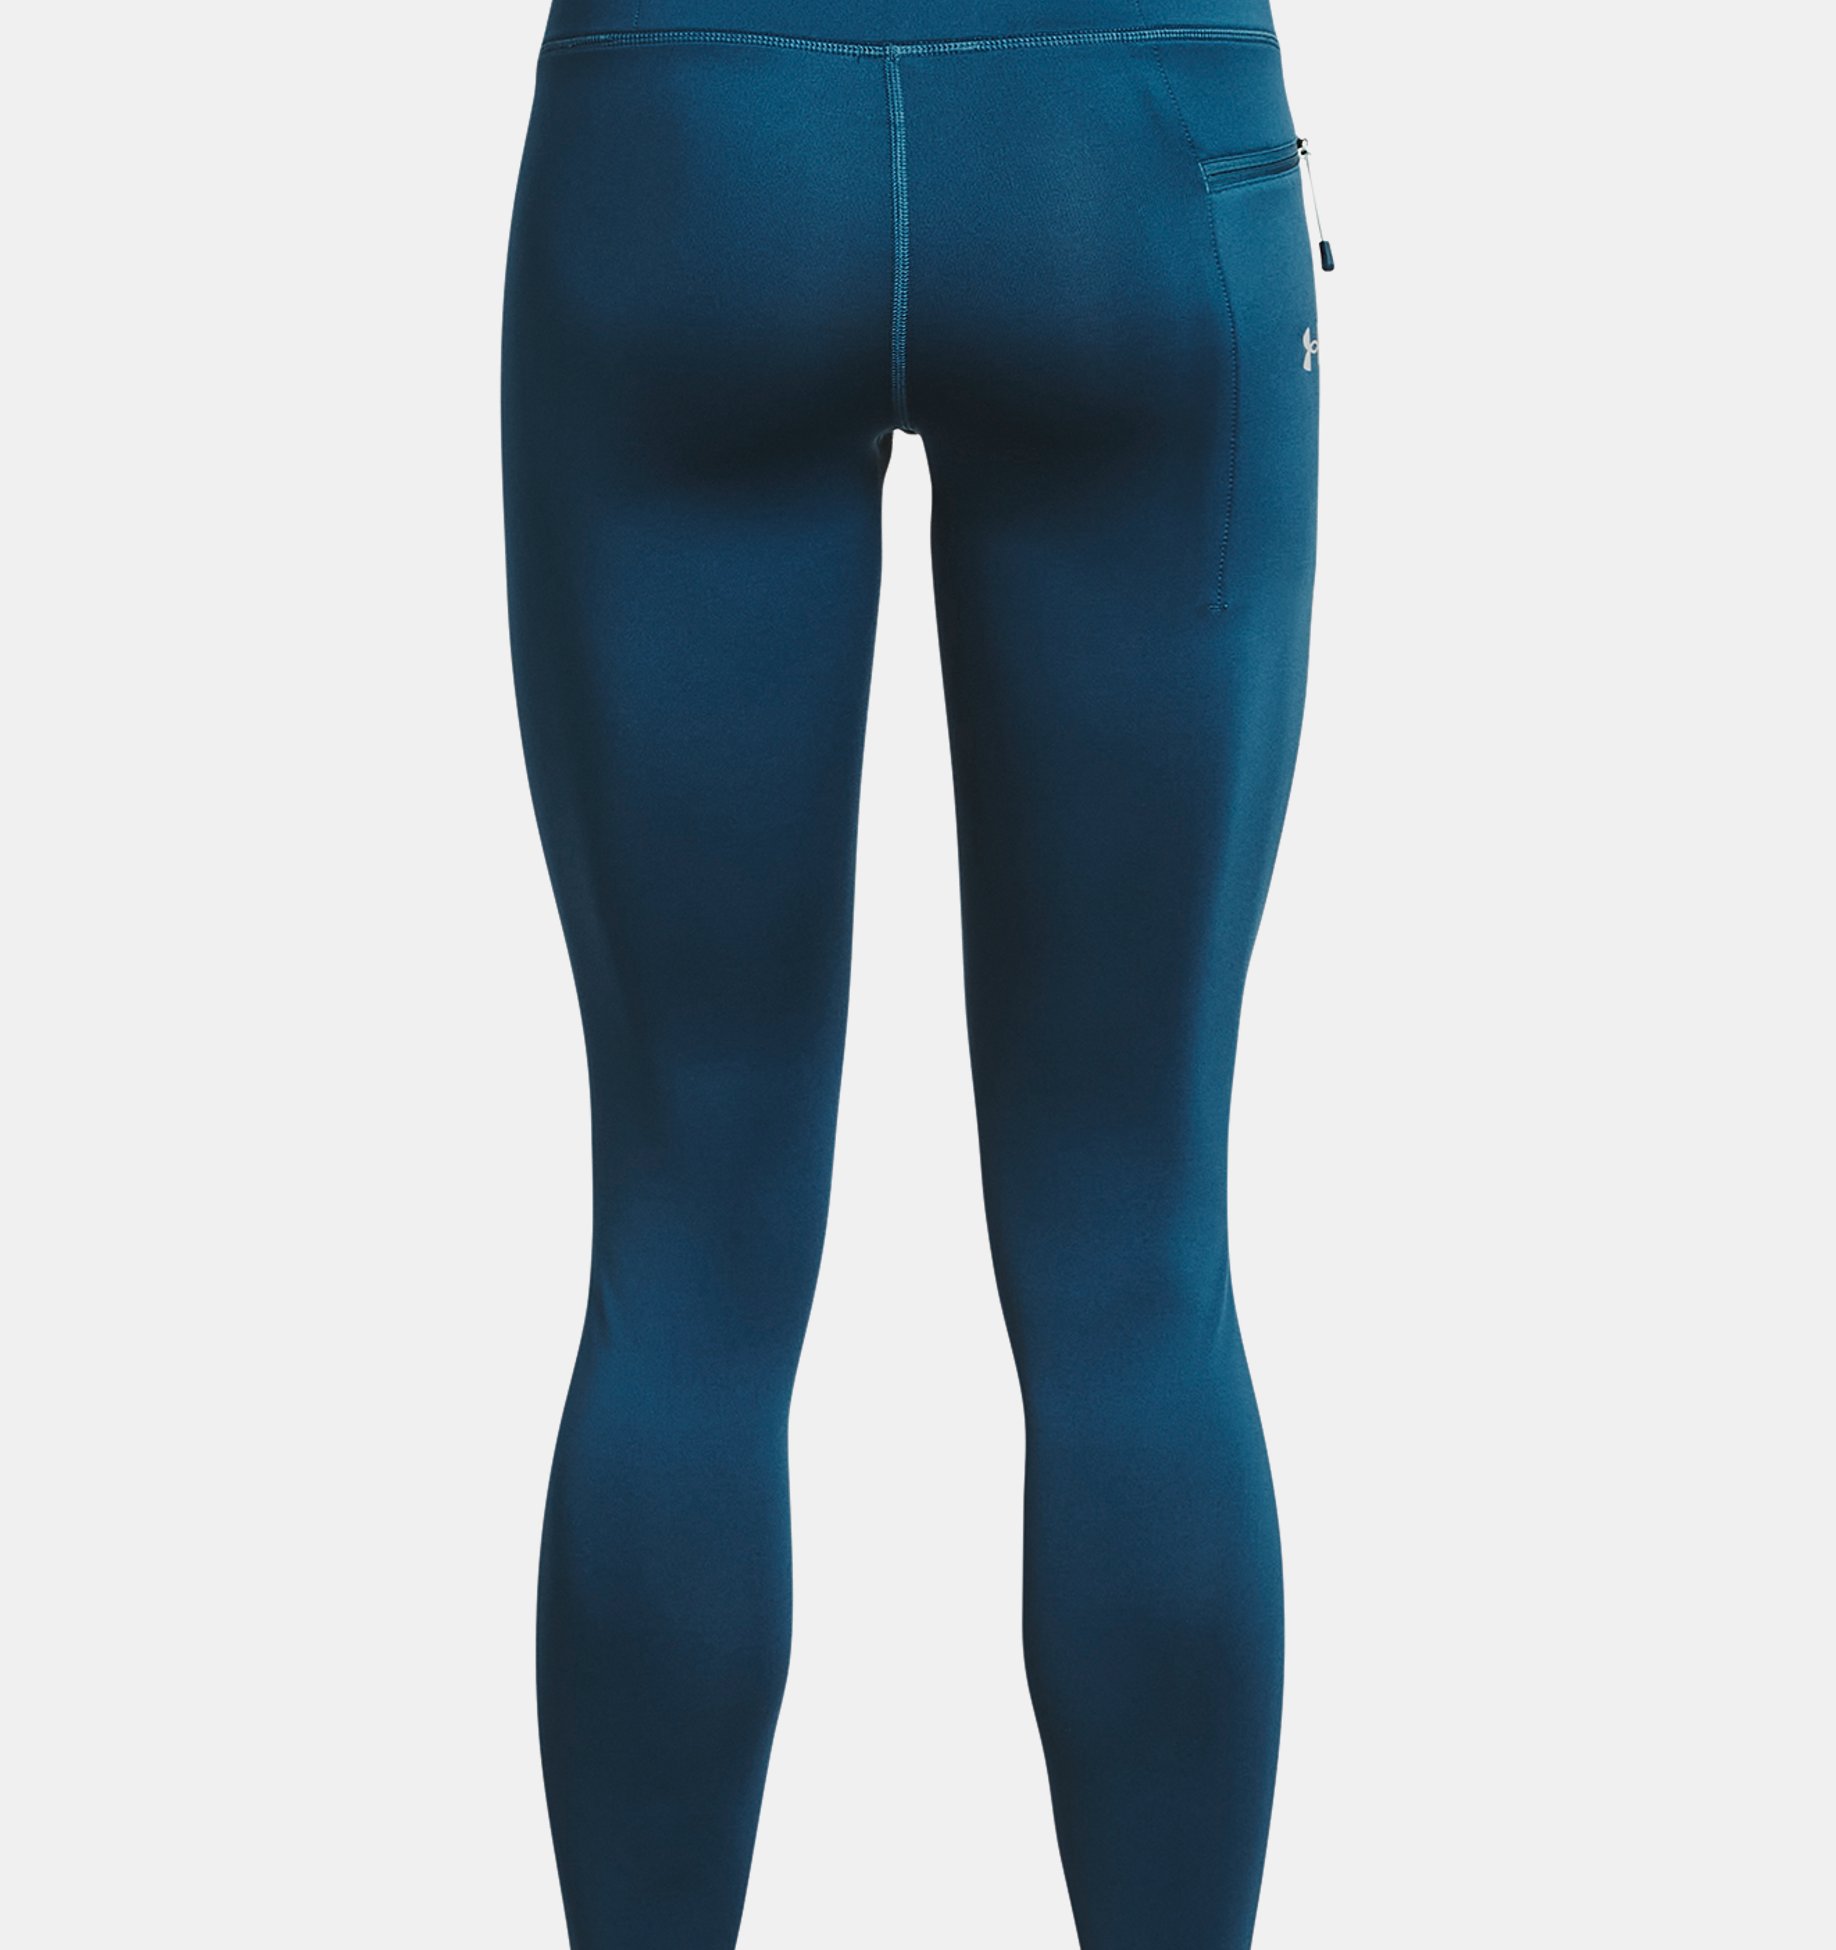 Womens compression leggings Under Armour OUTRUN THE COLD TIGHT W